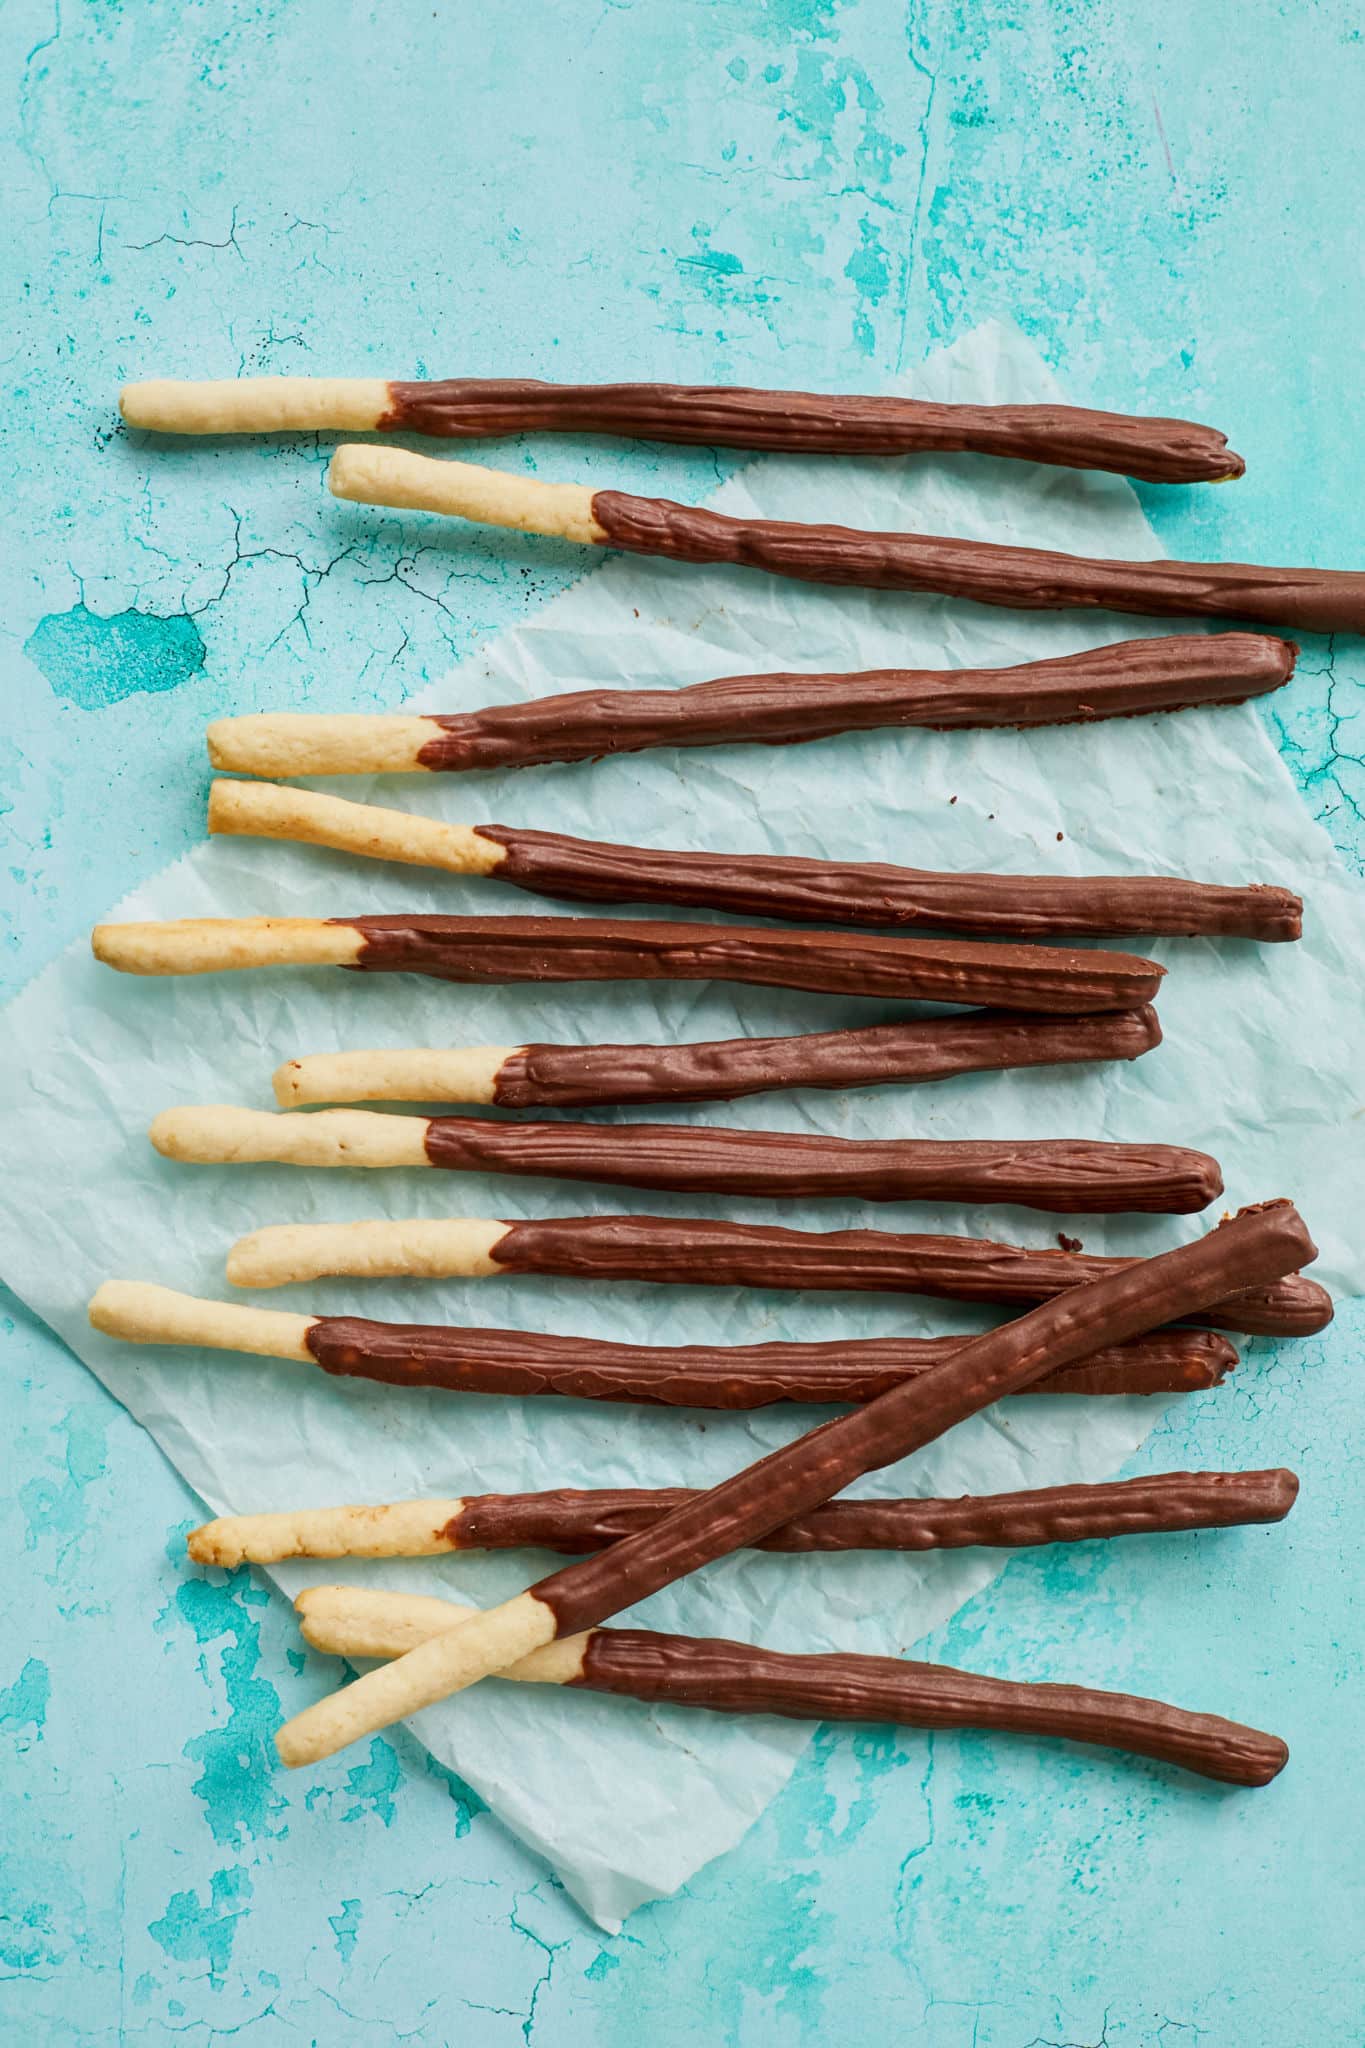 Homemade Pocky sticks are in a thin elongated-stick shape, with most of the stick covered in a chocolate-flavored coating while leaving a small section uncoated for easy handling. The cookies are placed on parchment paper with a light teal background. 